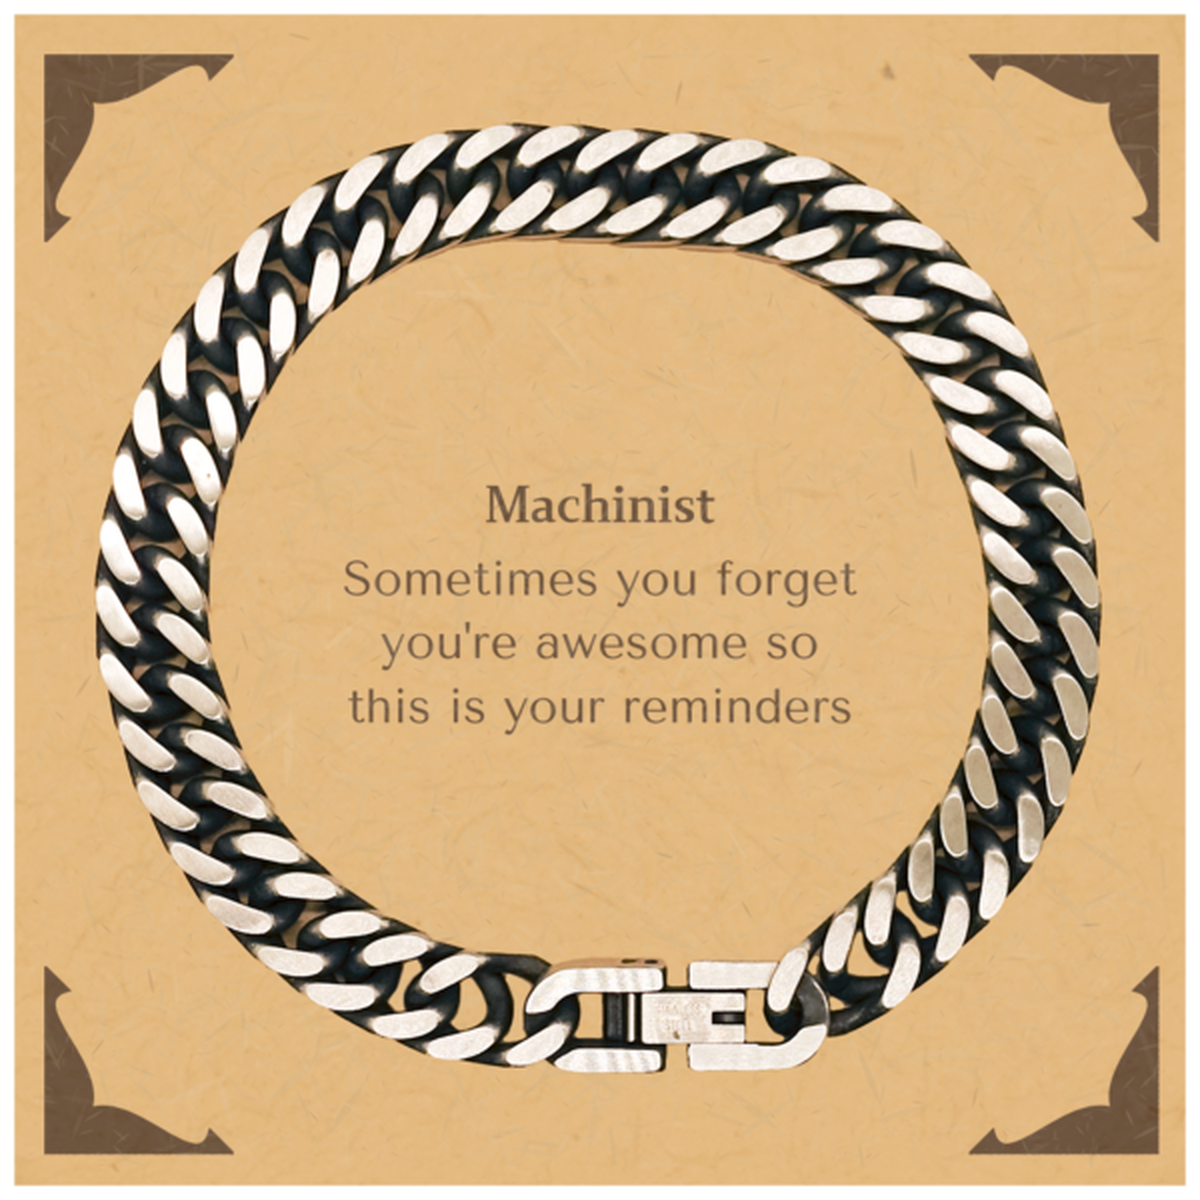 Sentimental Machinist Cuban Link Chain Bracelet, Machinist Sometimes you forget you're awesome so this is your reminders, Graduation Christmas Birthday Gifts for Machinist, Men, Women, Coworkers